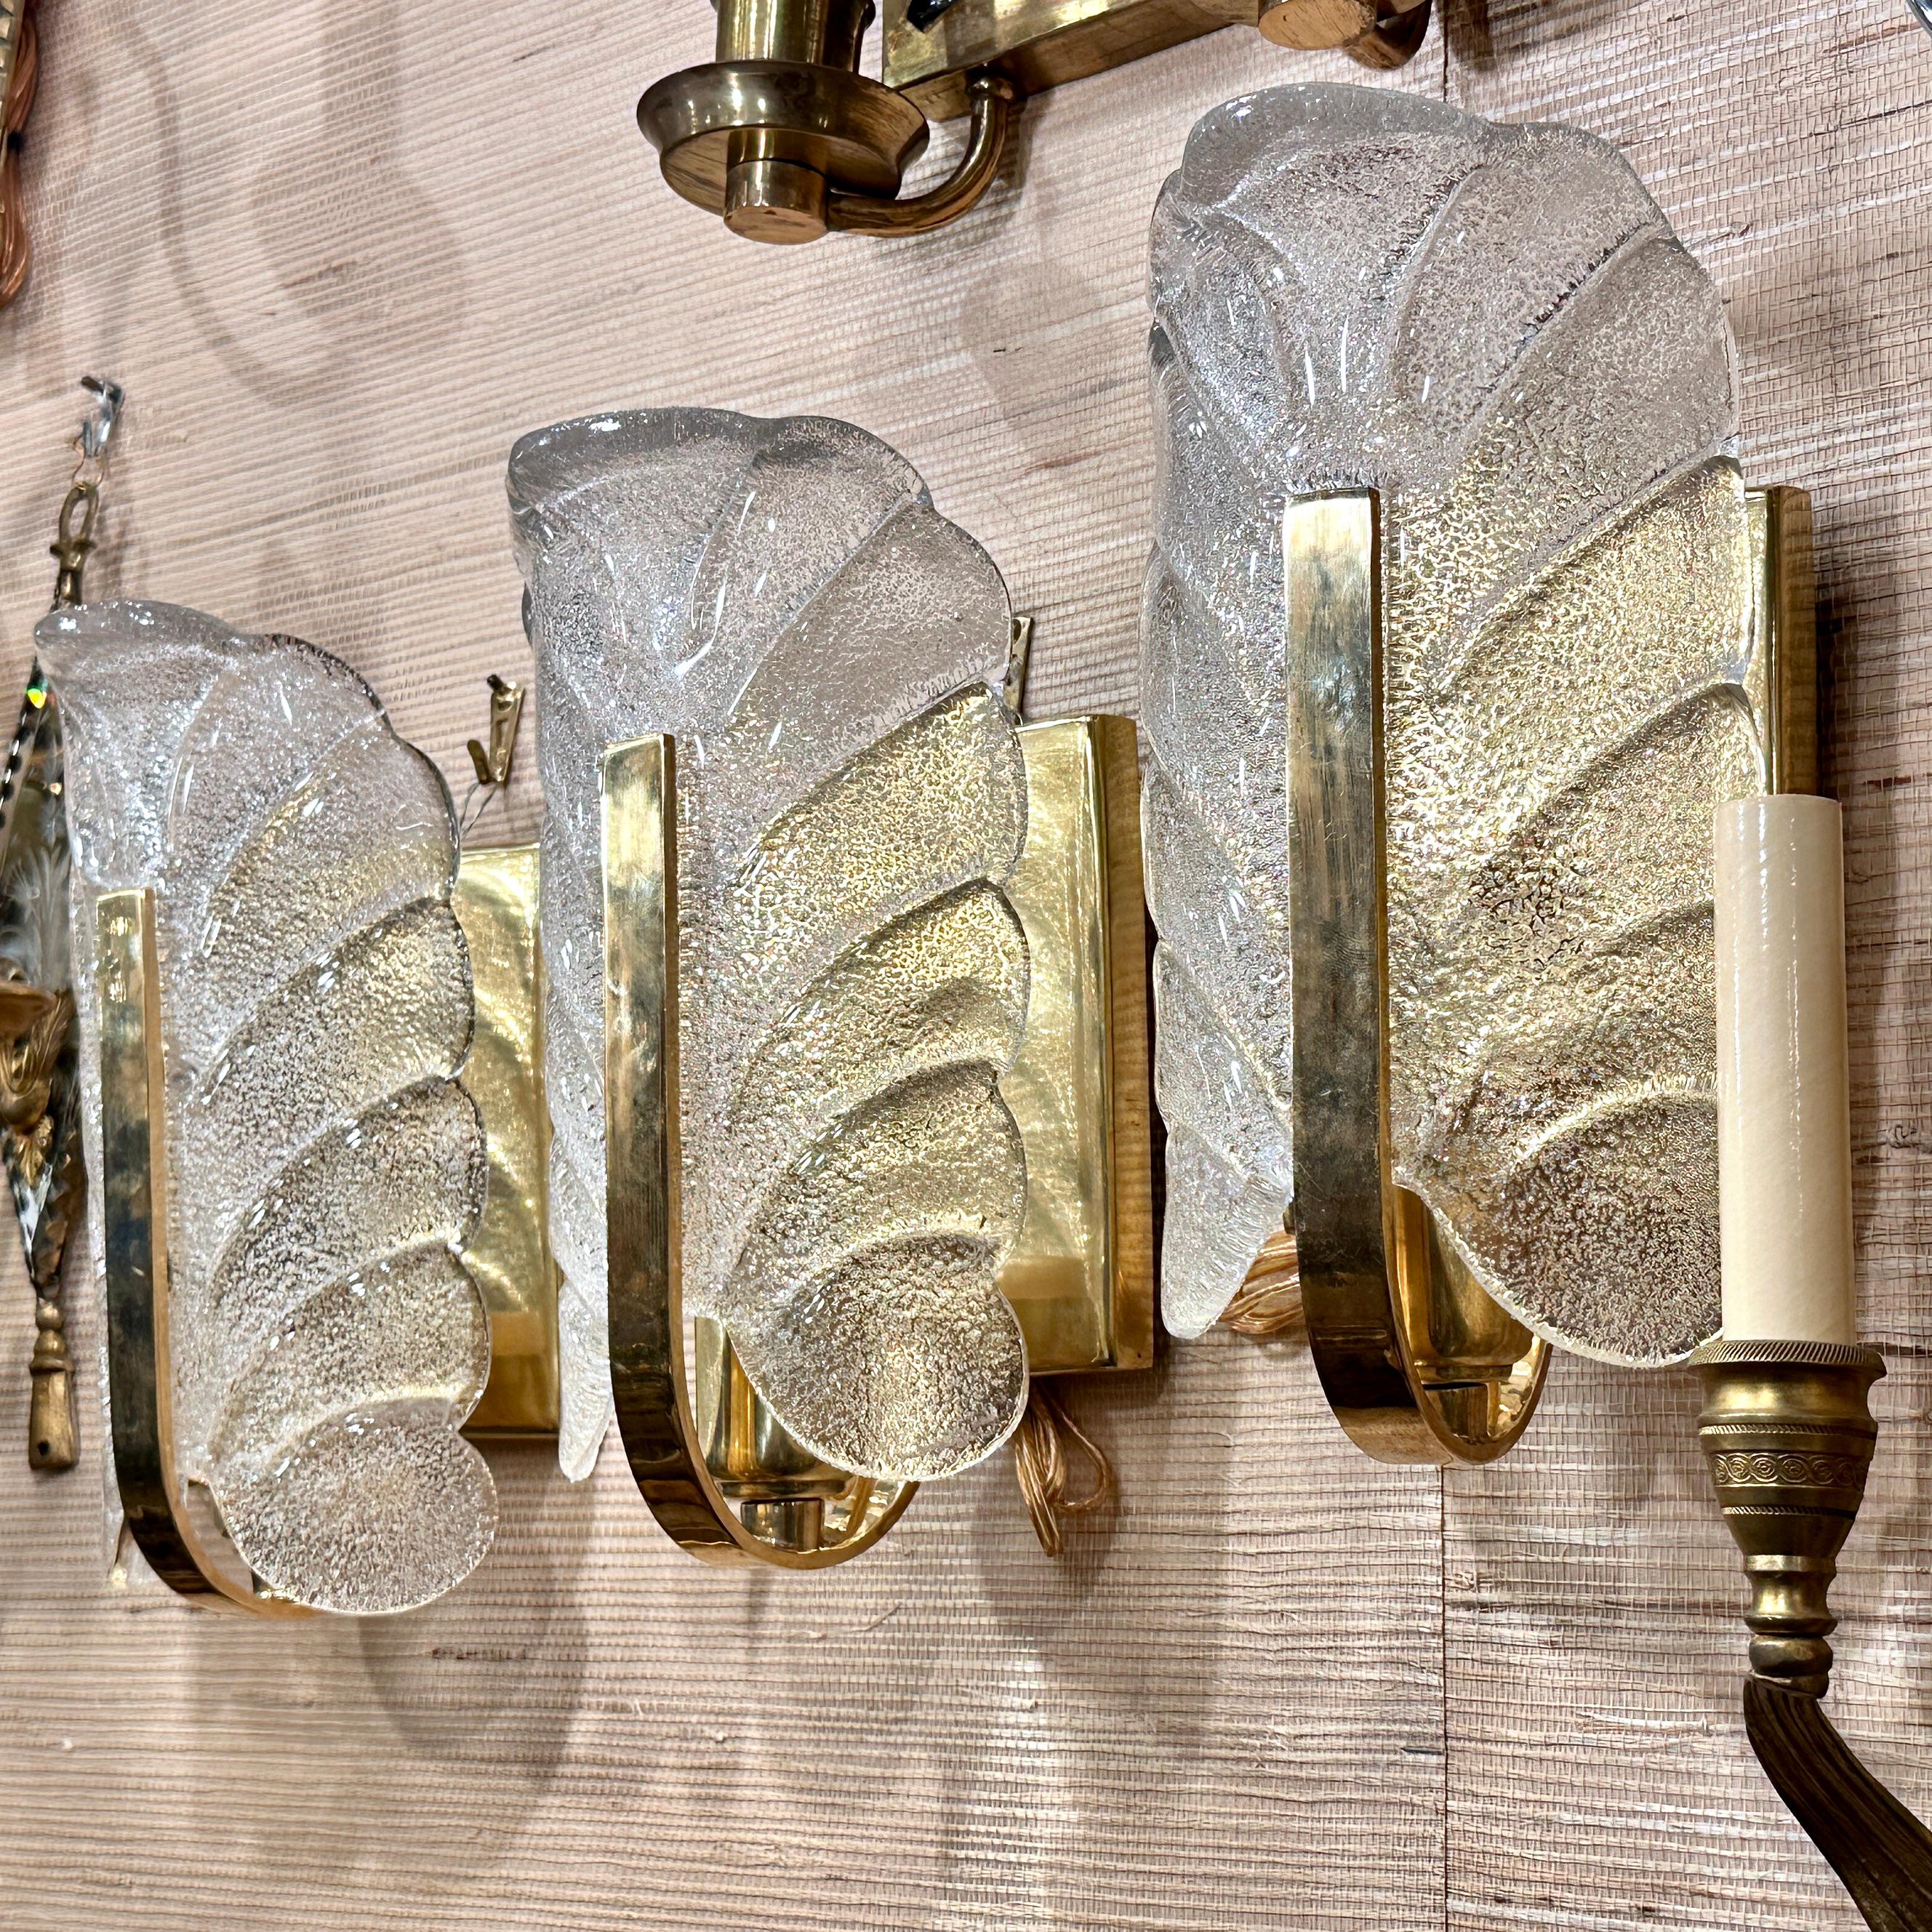 Set of six vintage circa 1960's Italian Murano glass sconces with bronze body. Sold per pair.

Measurements:
Height: 10